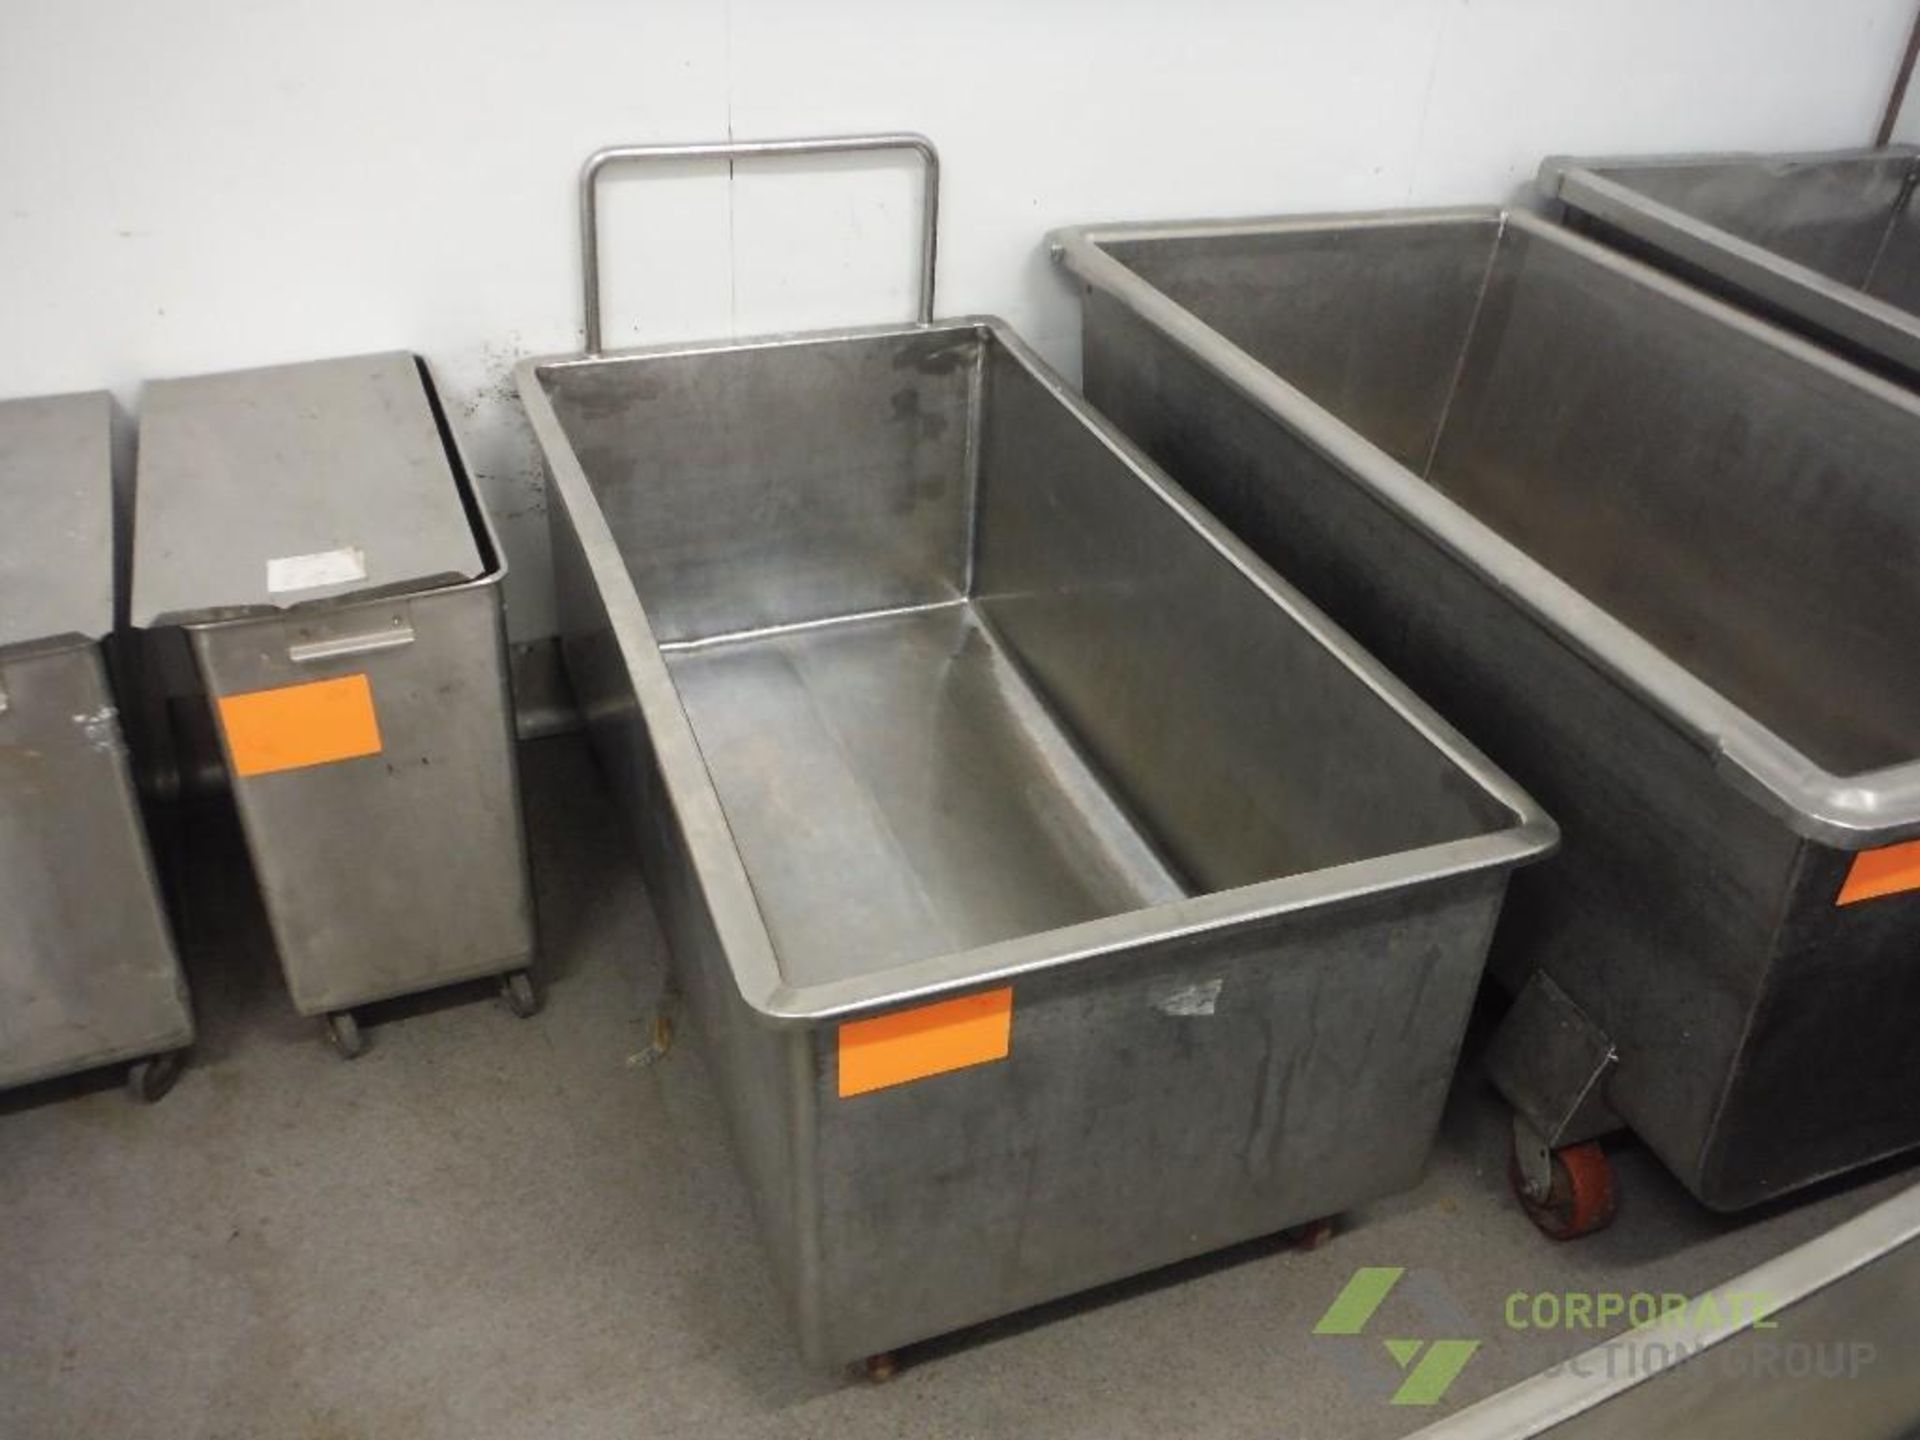 SS trough, 54 in. long x 28 in. wide x 21 in. tall, on casters